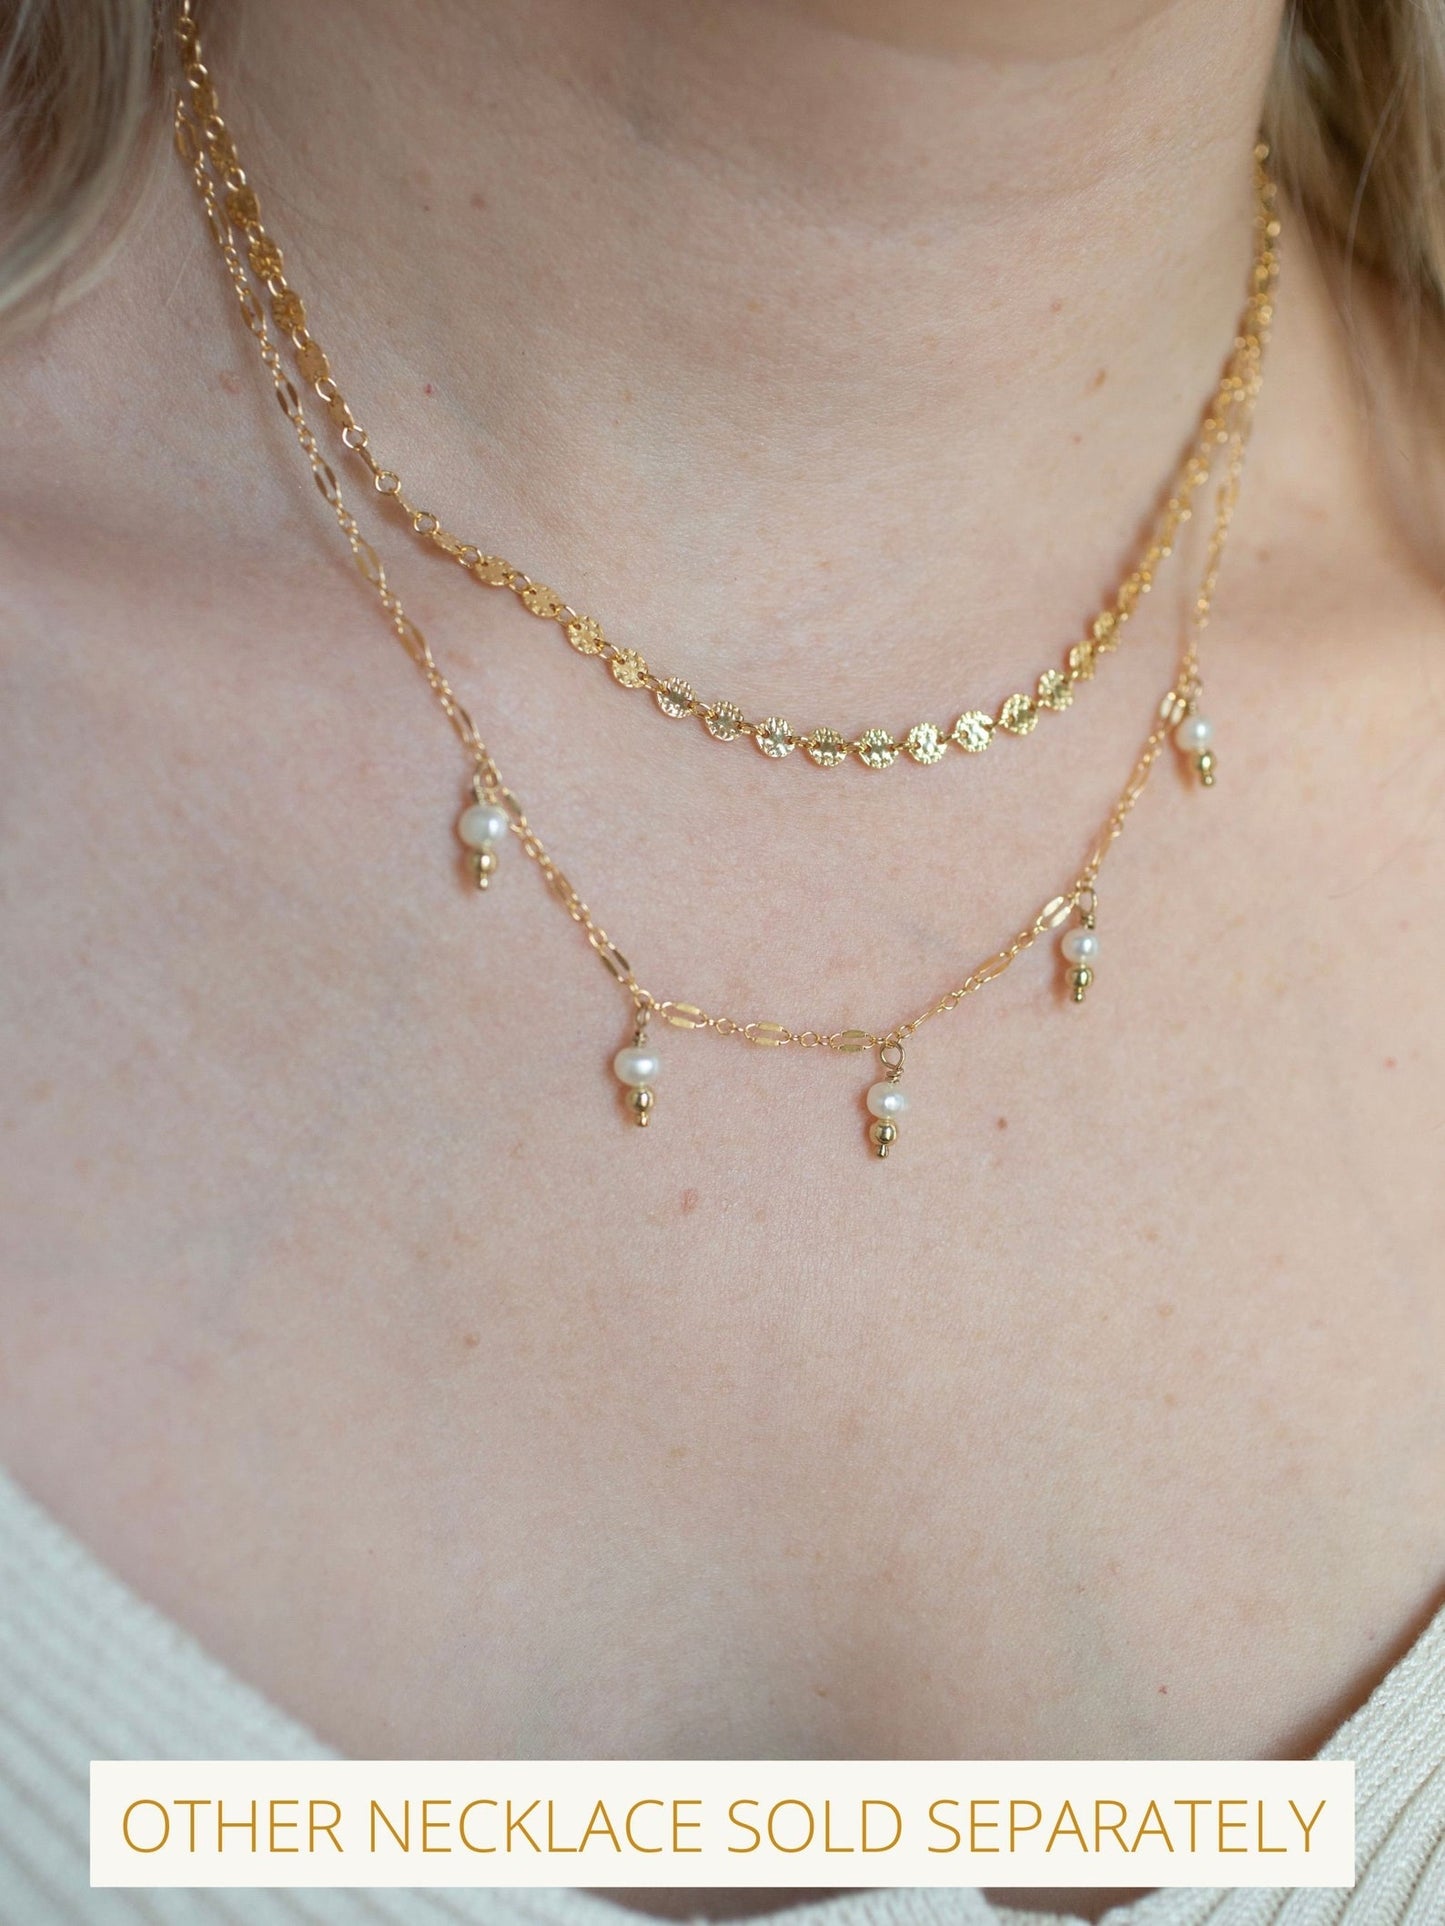 Pearl Droplets Necklace